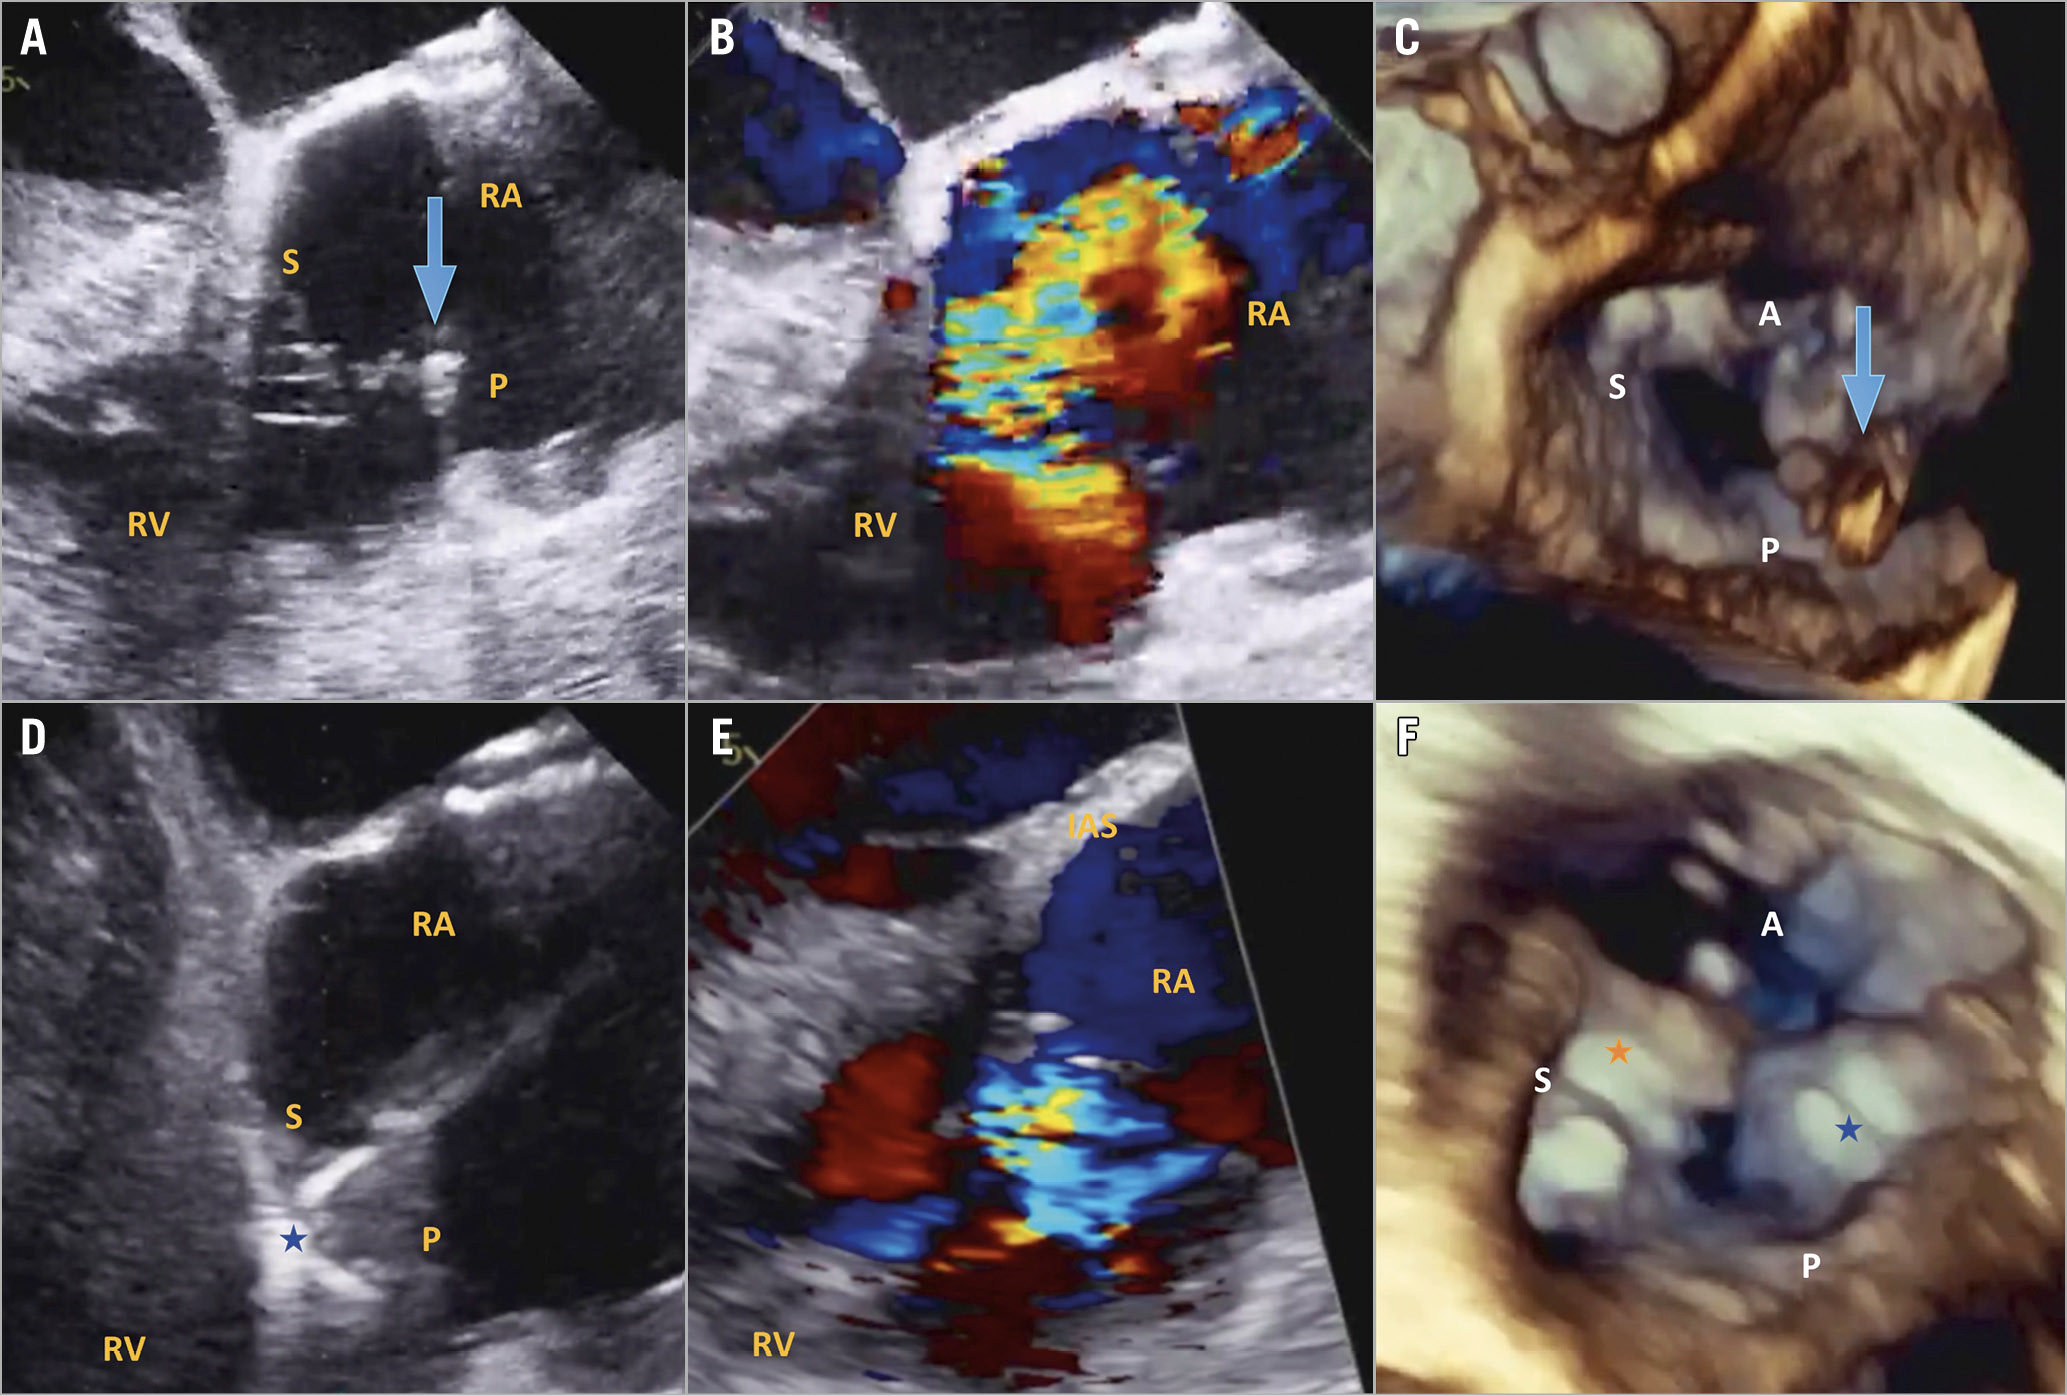 Figure 1. TTVr with the modified TriClip/MitraClip G4 system. A) Baseline transoesophageal echo (TEE) 150-degree view demonstrating large posterior leaflet flail. B) Baseline TEE 150-degree view with colour Doppler demonstrating torrential tricuspid regurgitation (TR). C) 3D TEE view demonstrating posterior leaflet flail. D) TEE 150-degree view of leaflet grasping with the MitraClip G4 XTW. E) Post-procedural TEE 150-degree view demonstrating moderate TR. F) 3D TEE view demonstrating tissue bridge and elimination of posterior flail. A: anterior leaflet; P: posterior leaflet; RA: right atrium; RV: right ventricle; S: septal leaflet. Blue arrow indicates flail posterior leaflet, orange star indicates TriClip XT between anterior and septal leaflets, blue star indicates MitraClip G4 XTW between posterior and septal leaflets.